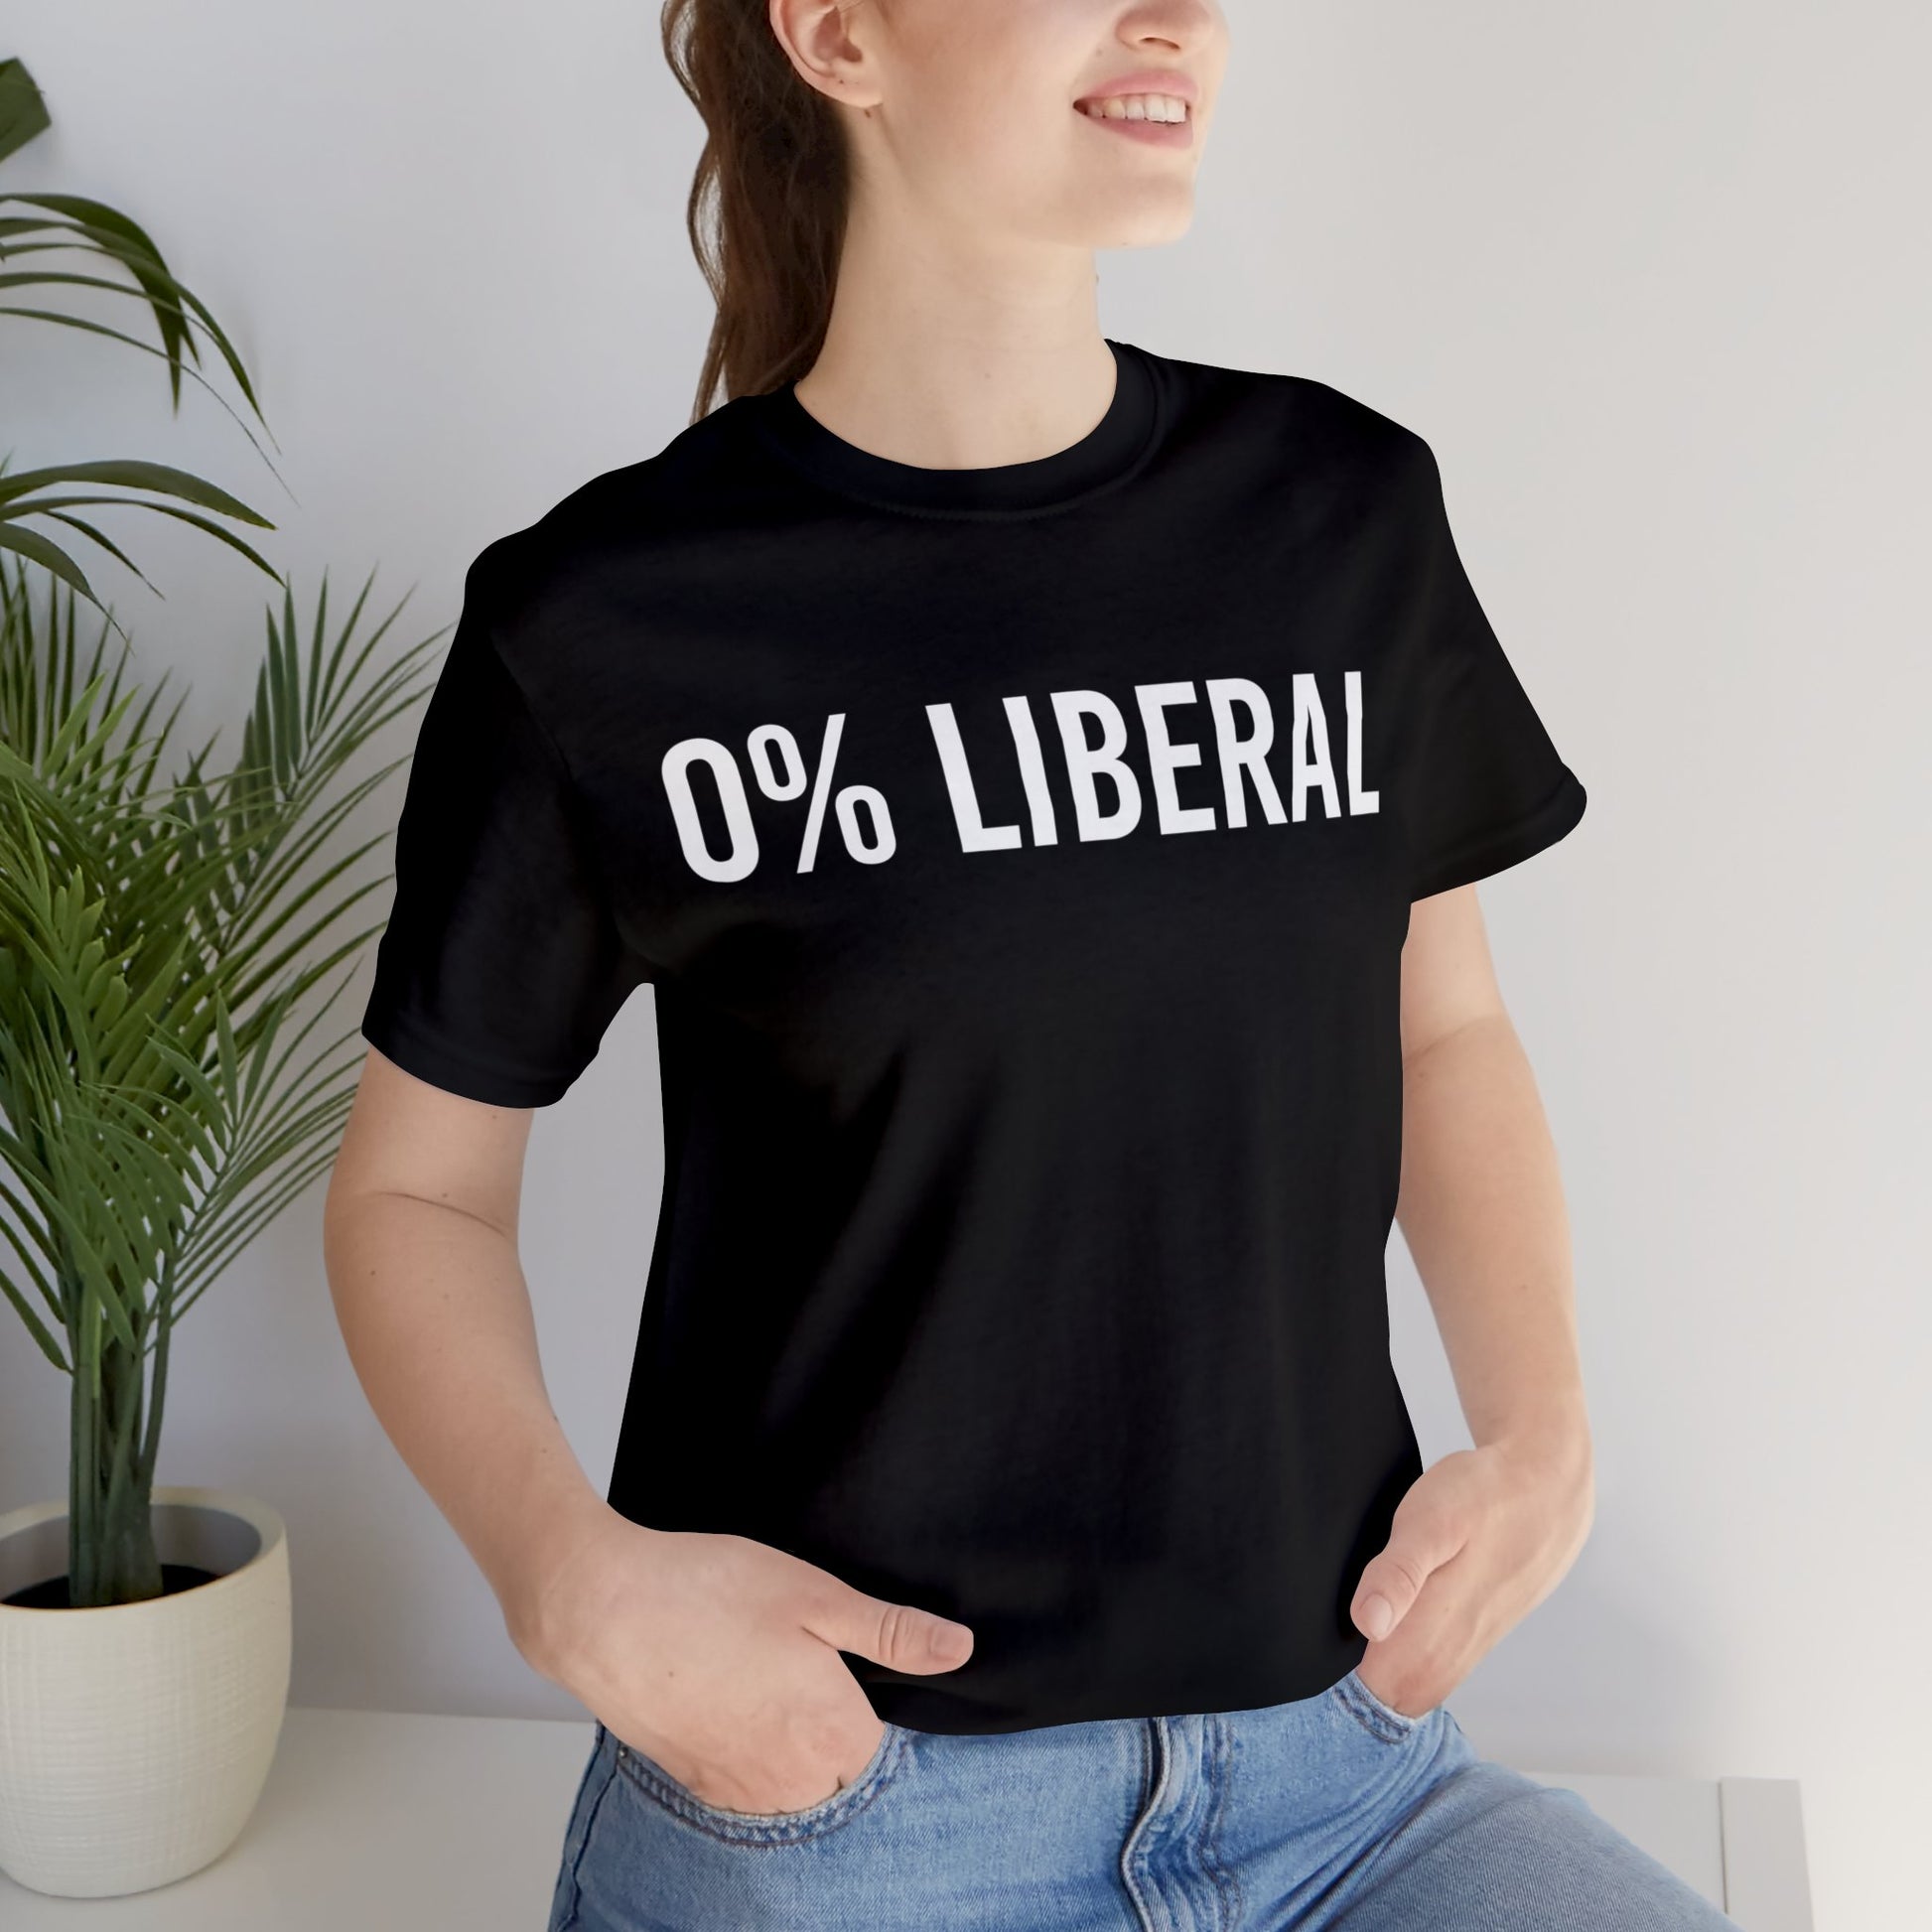 "Zero Percent Liberal Tee, Funny Conservative Shirt, Political Humor T-Shirt, Bold Statement Tee for Right-Wing Supporters" - News For Reasonable People